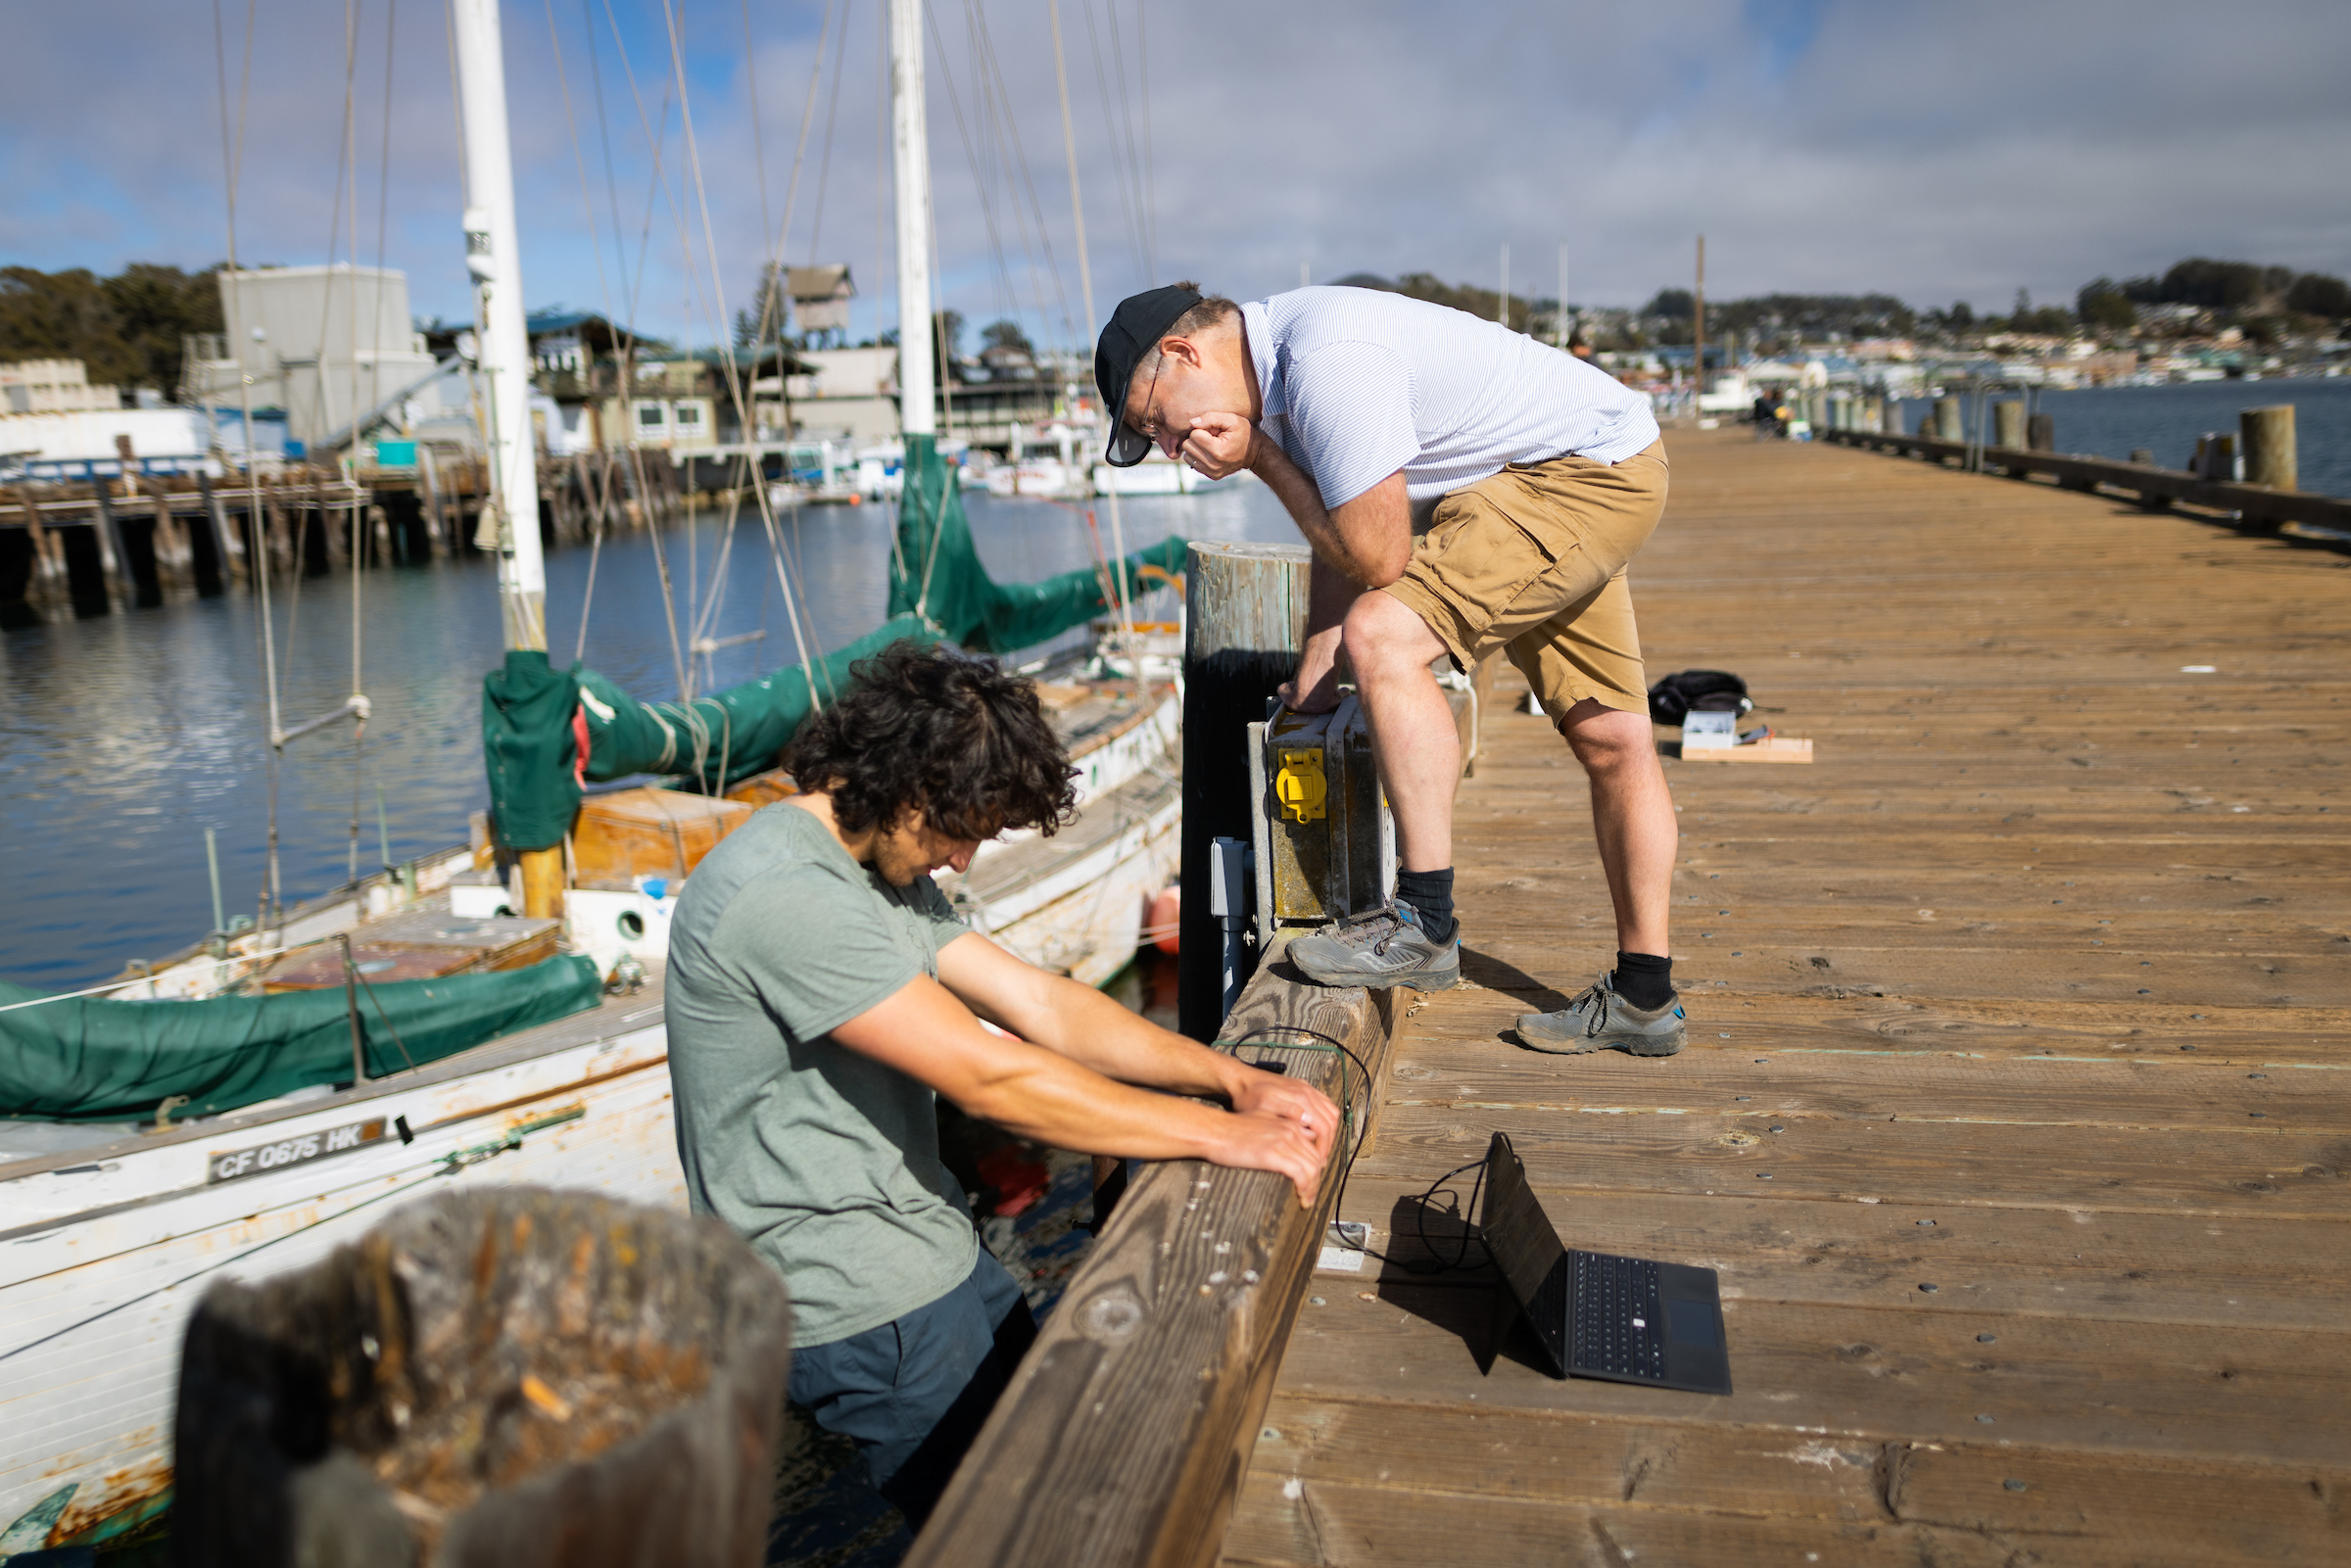 A student hangs off the edge of a pier and his professor leans down to talk to him. They are deploying sensors to measure waves and tides.